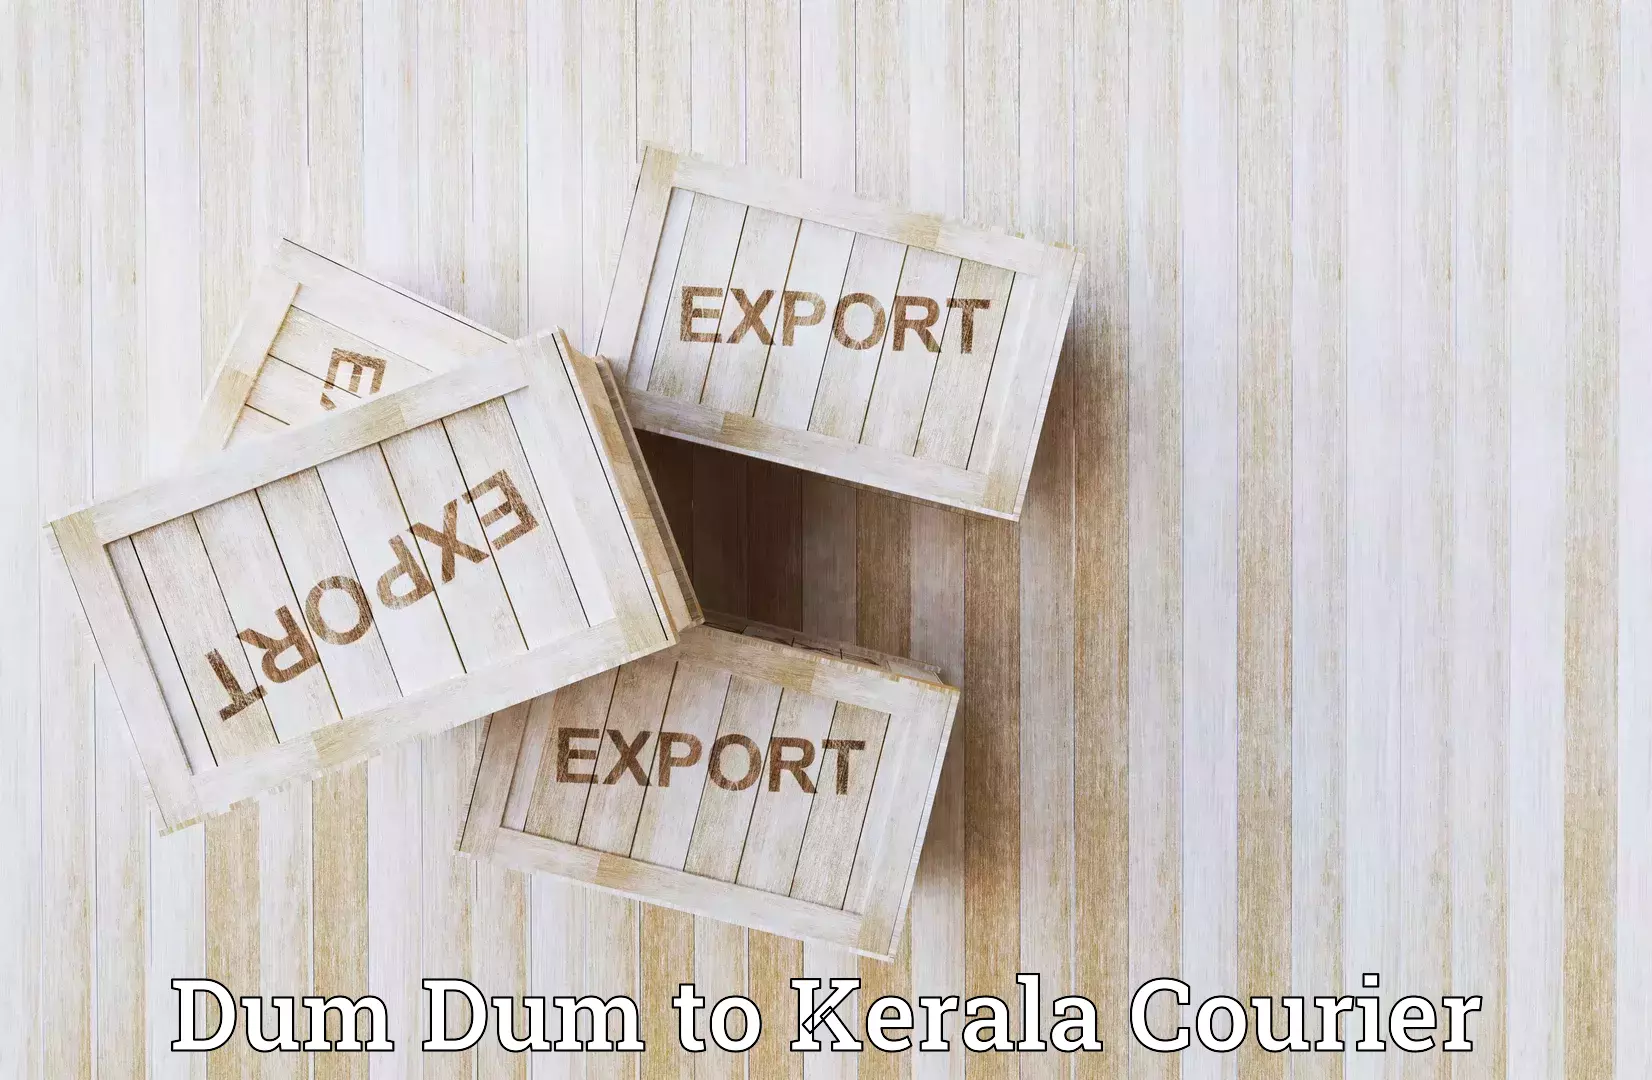 On-call courier service in Dum Dum to Cochin Port Kochi